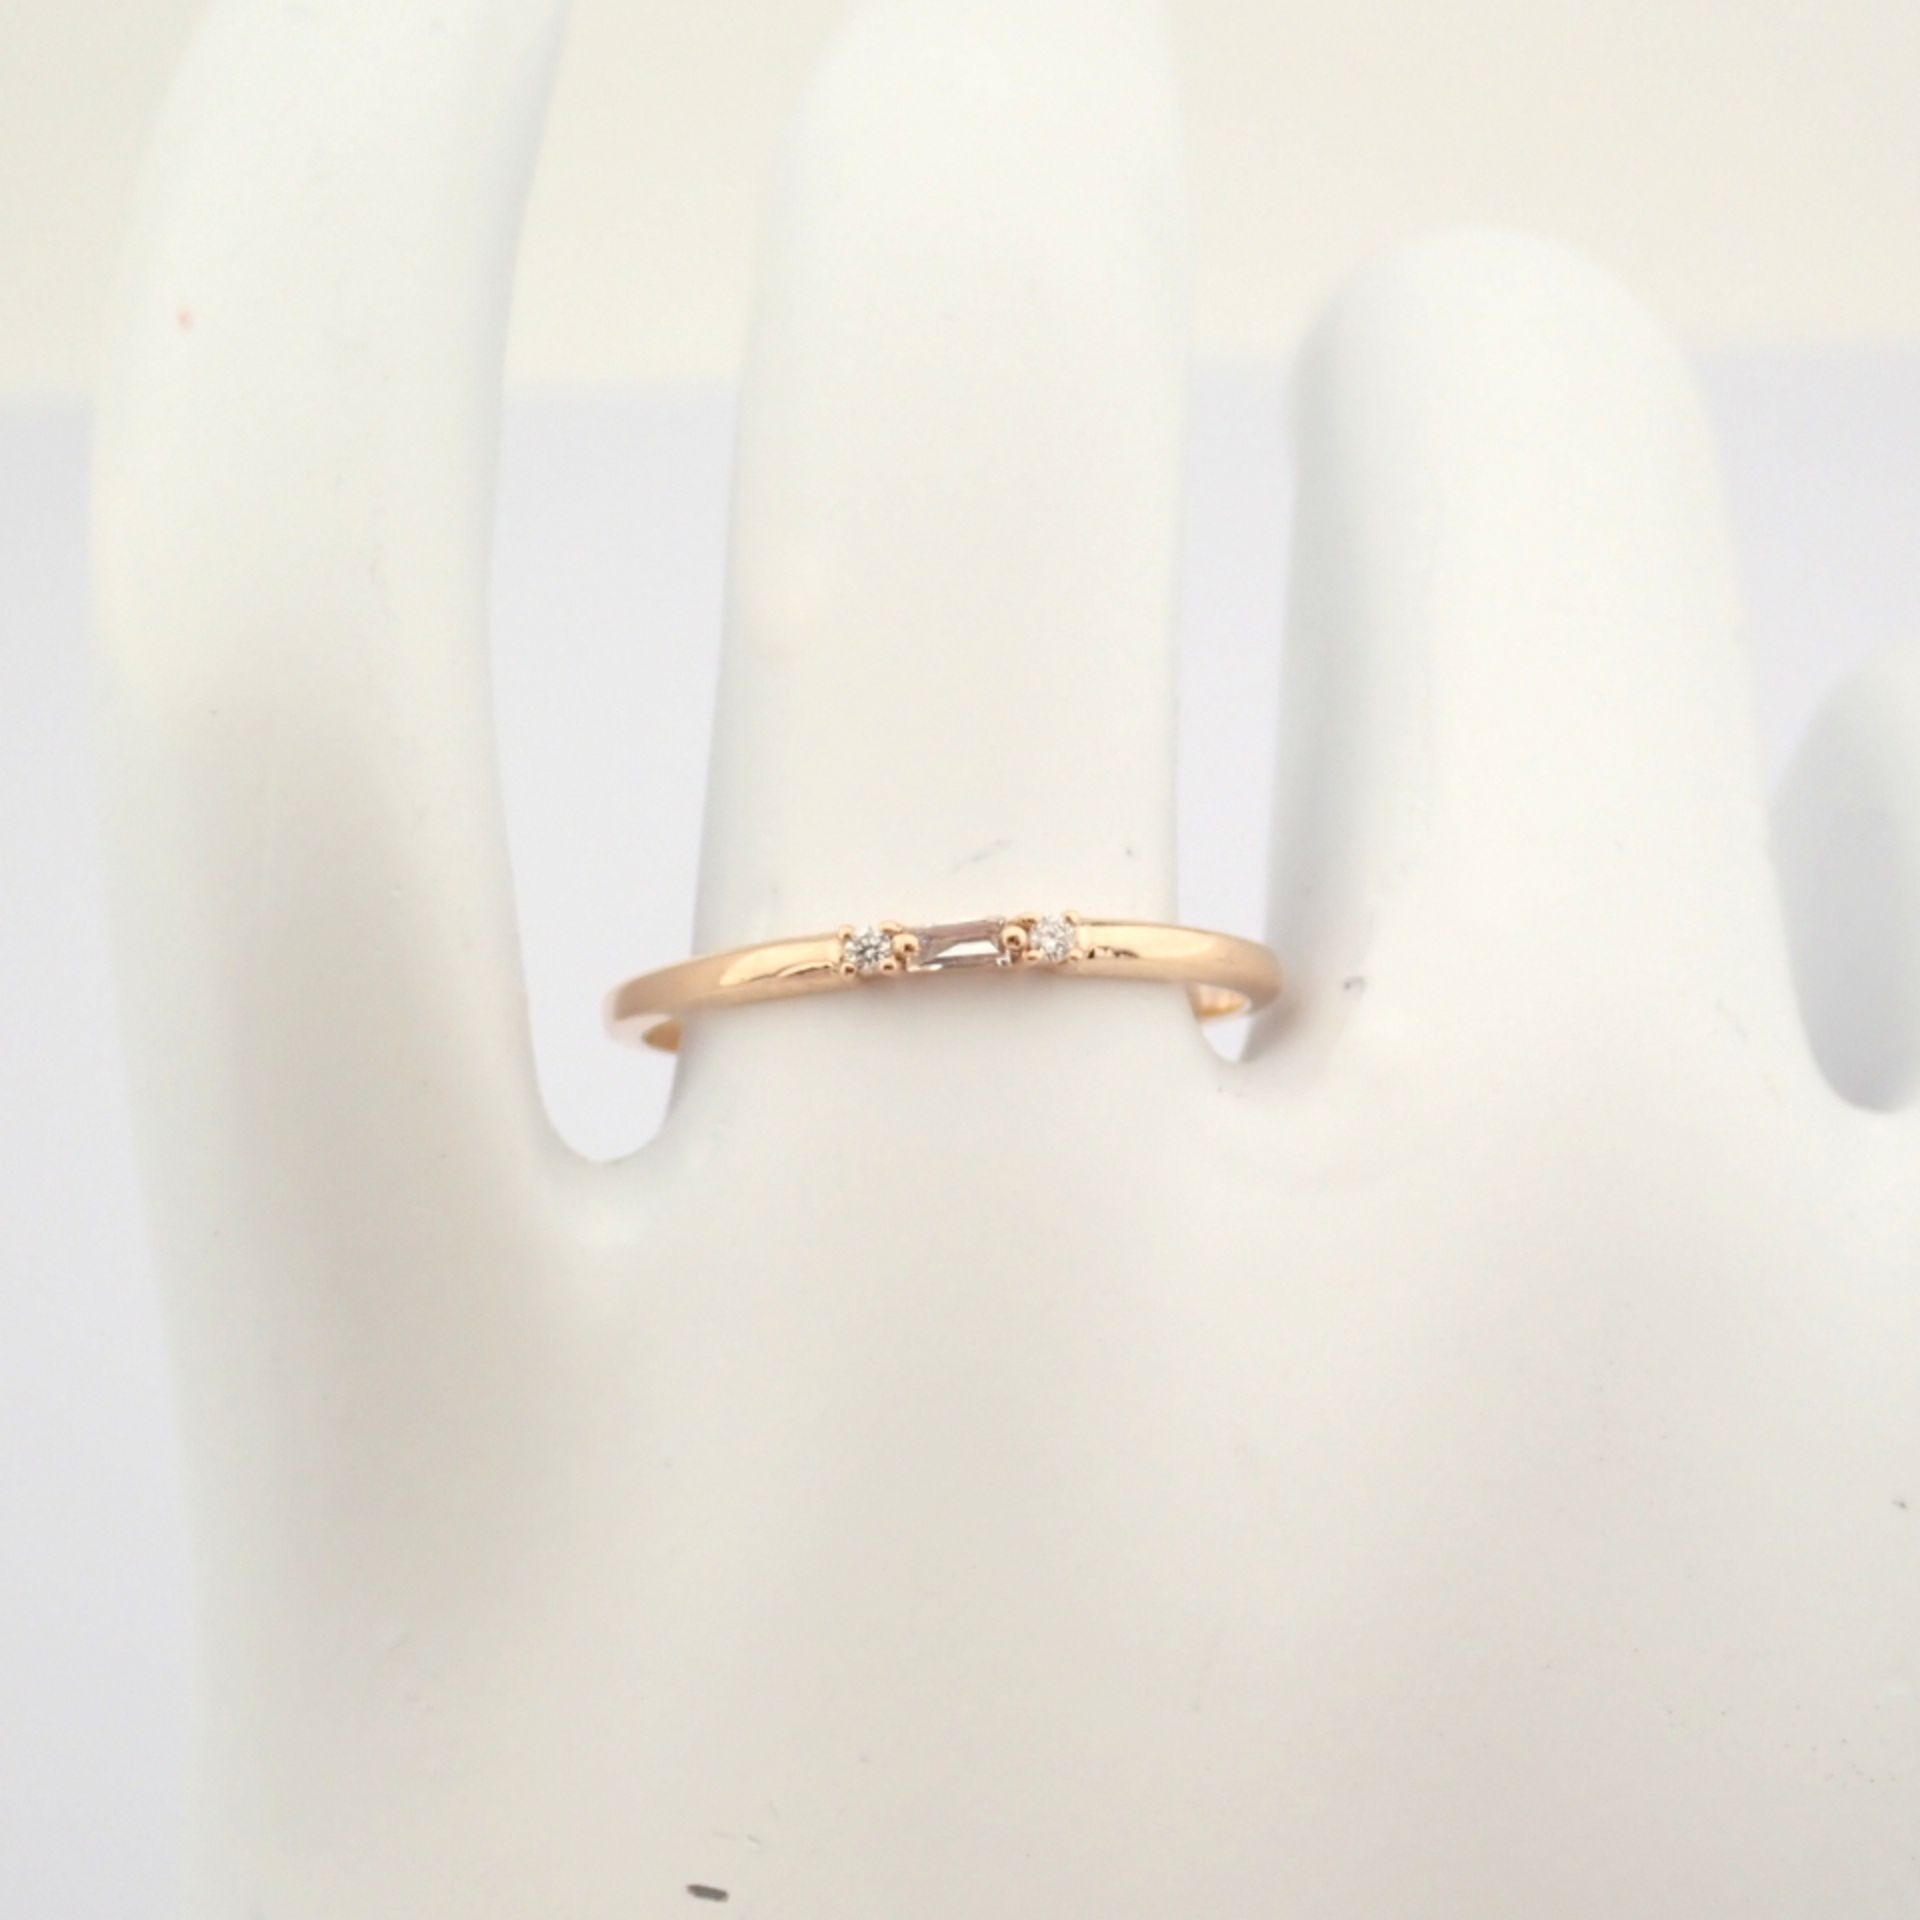 Certificated 14K Rose/Pink Gold Baguette Diamond & Diamond Ring (Total 0.04 ct Stone) - Image 12 of 12